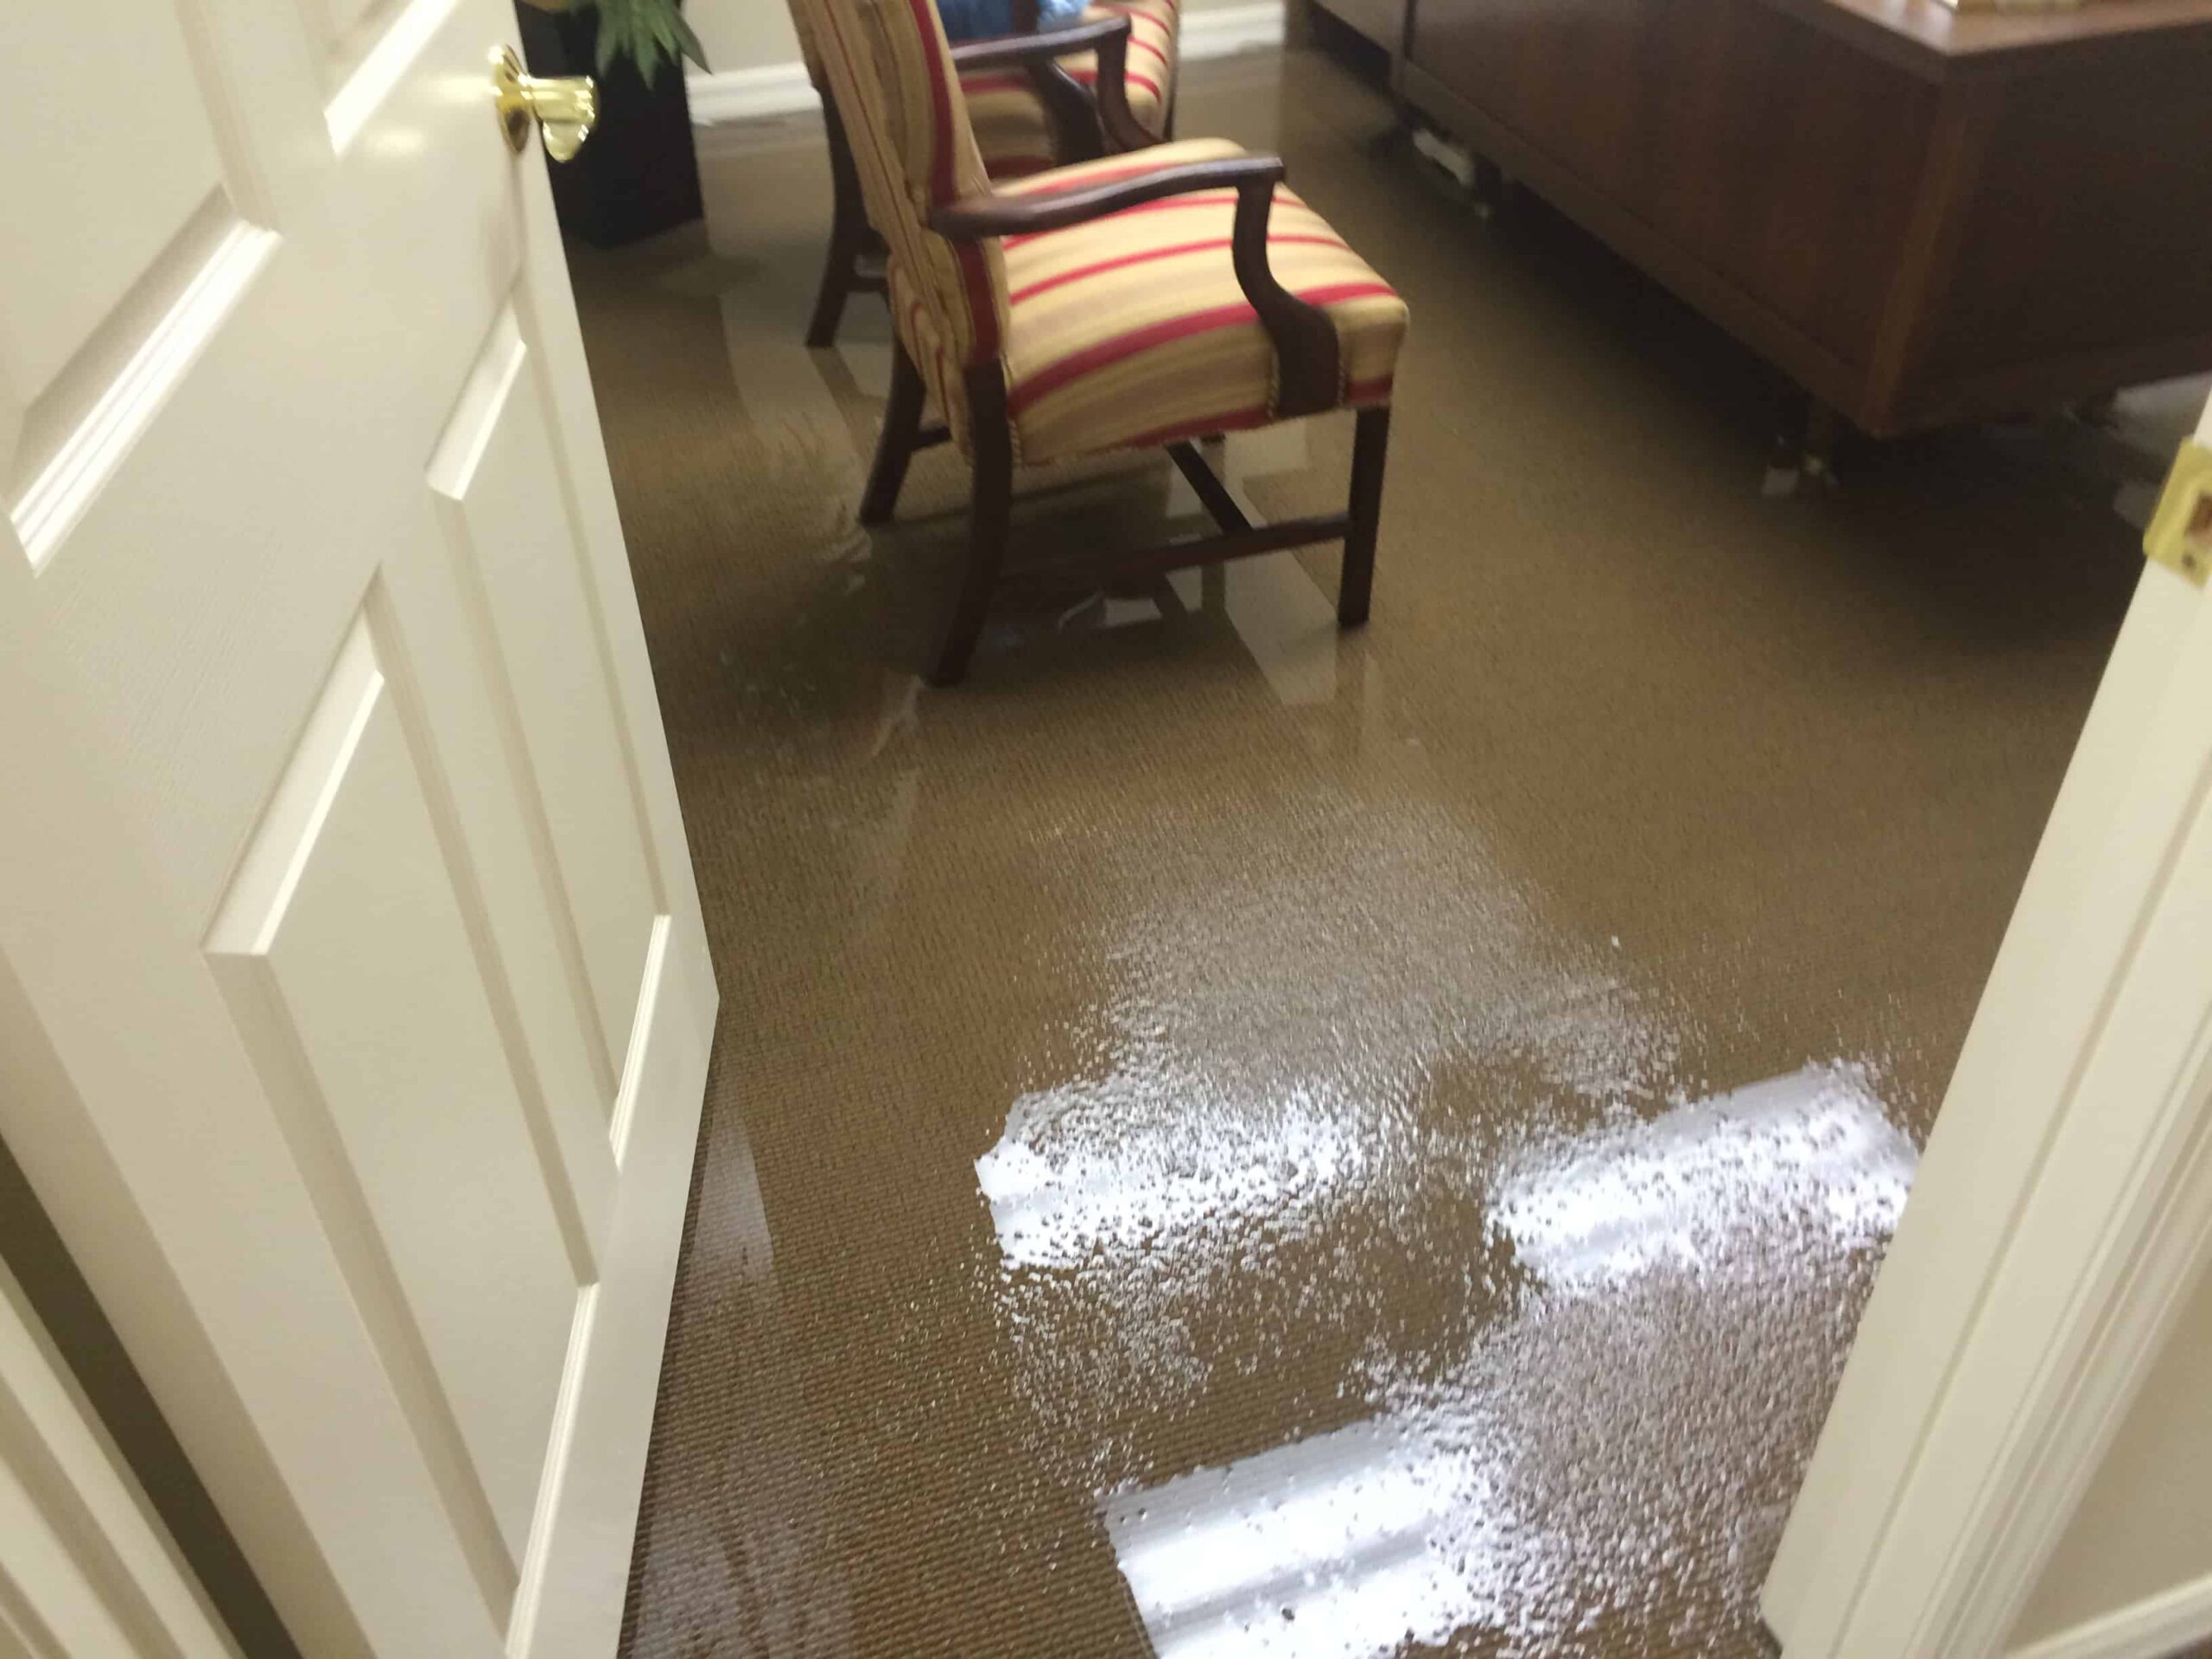 evidence of water damage flood damagein office, standing water on the floor